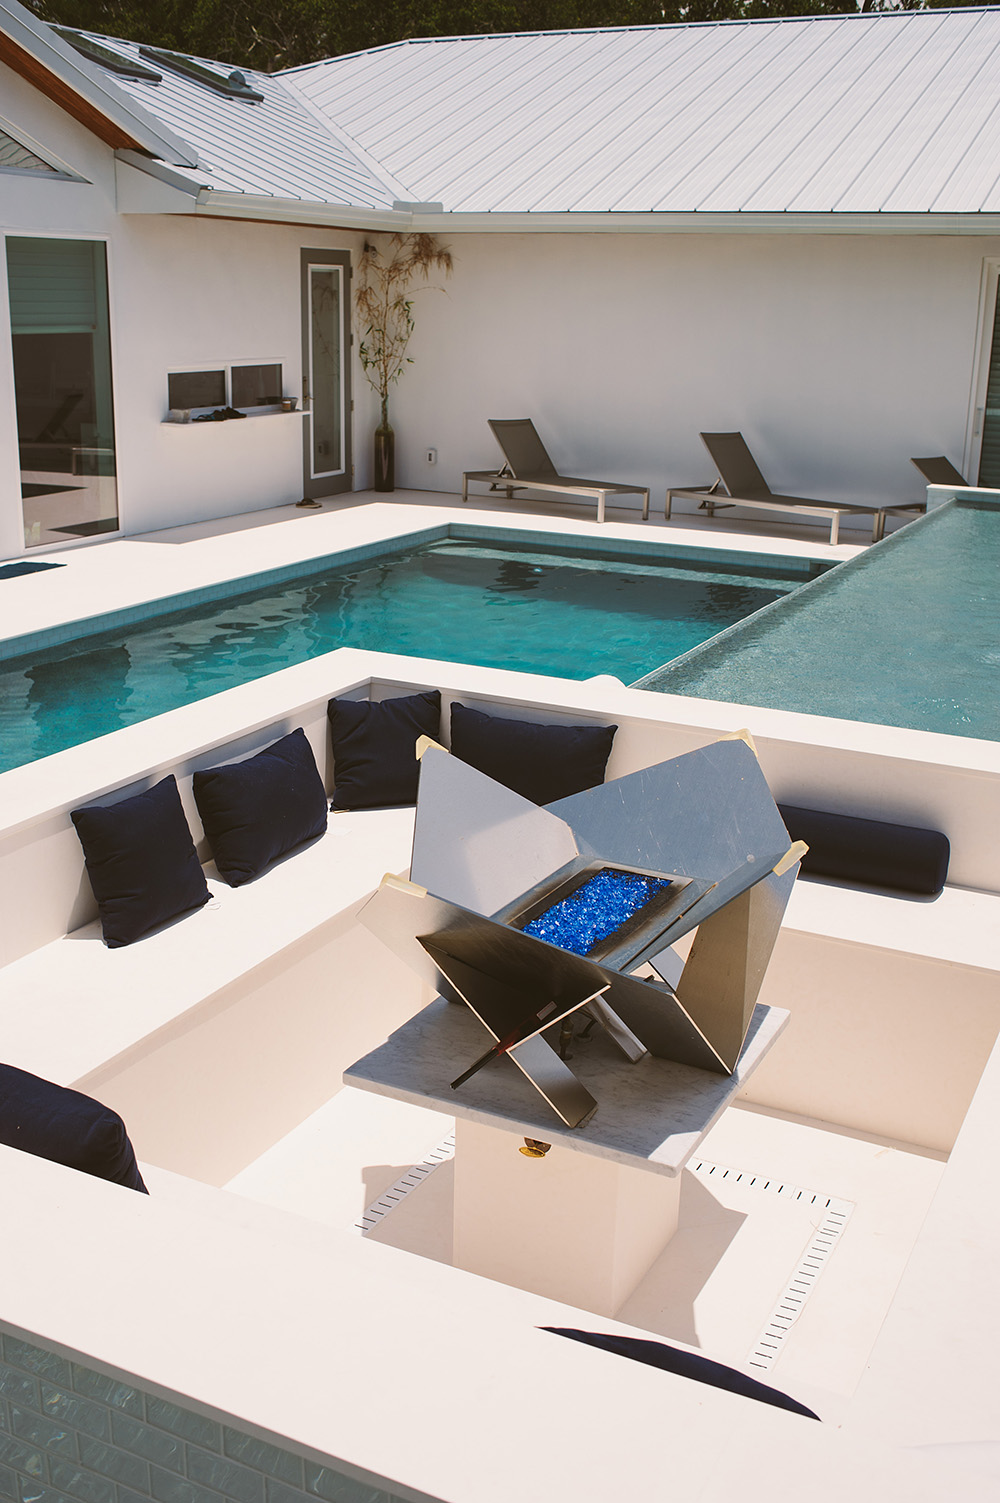 Design your luxury pool area with thoughtfully placed seating areas